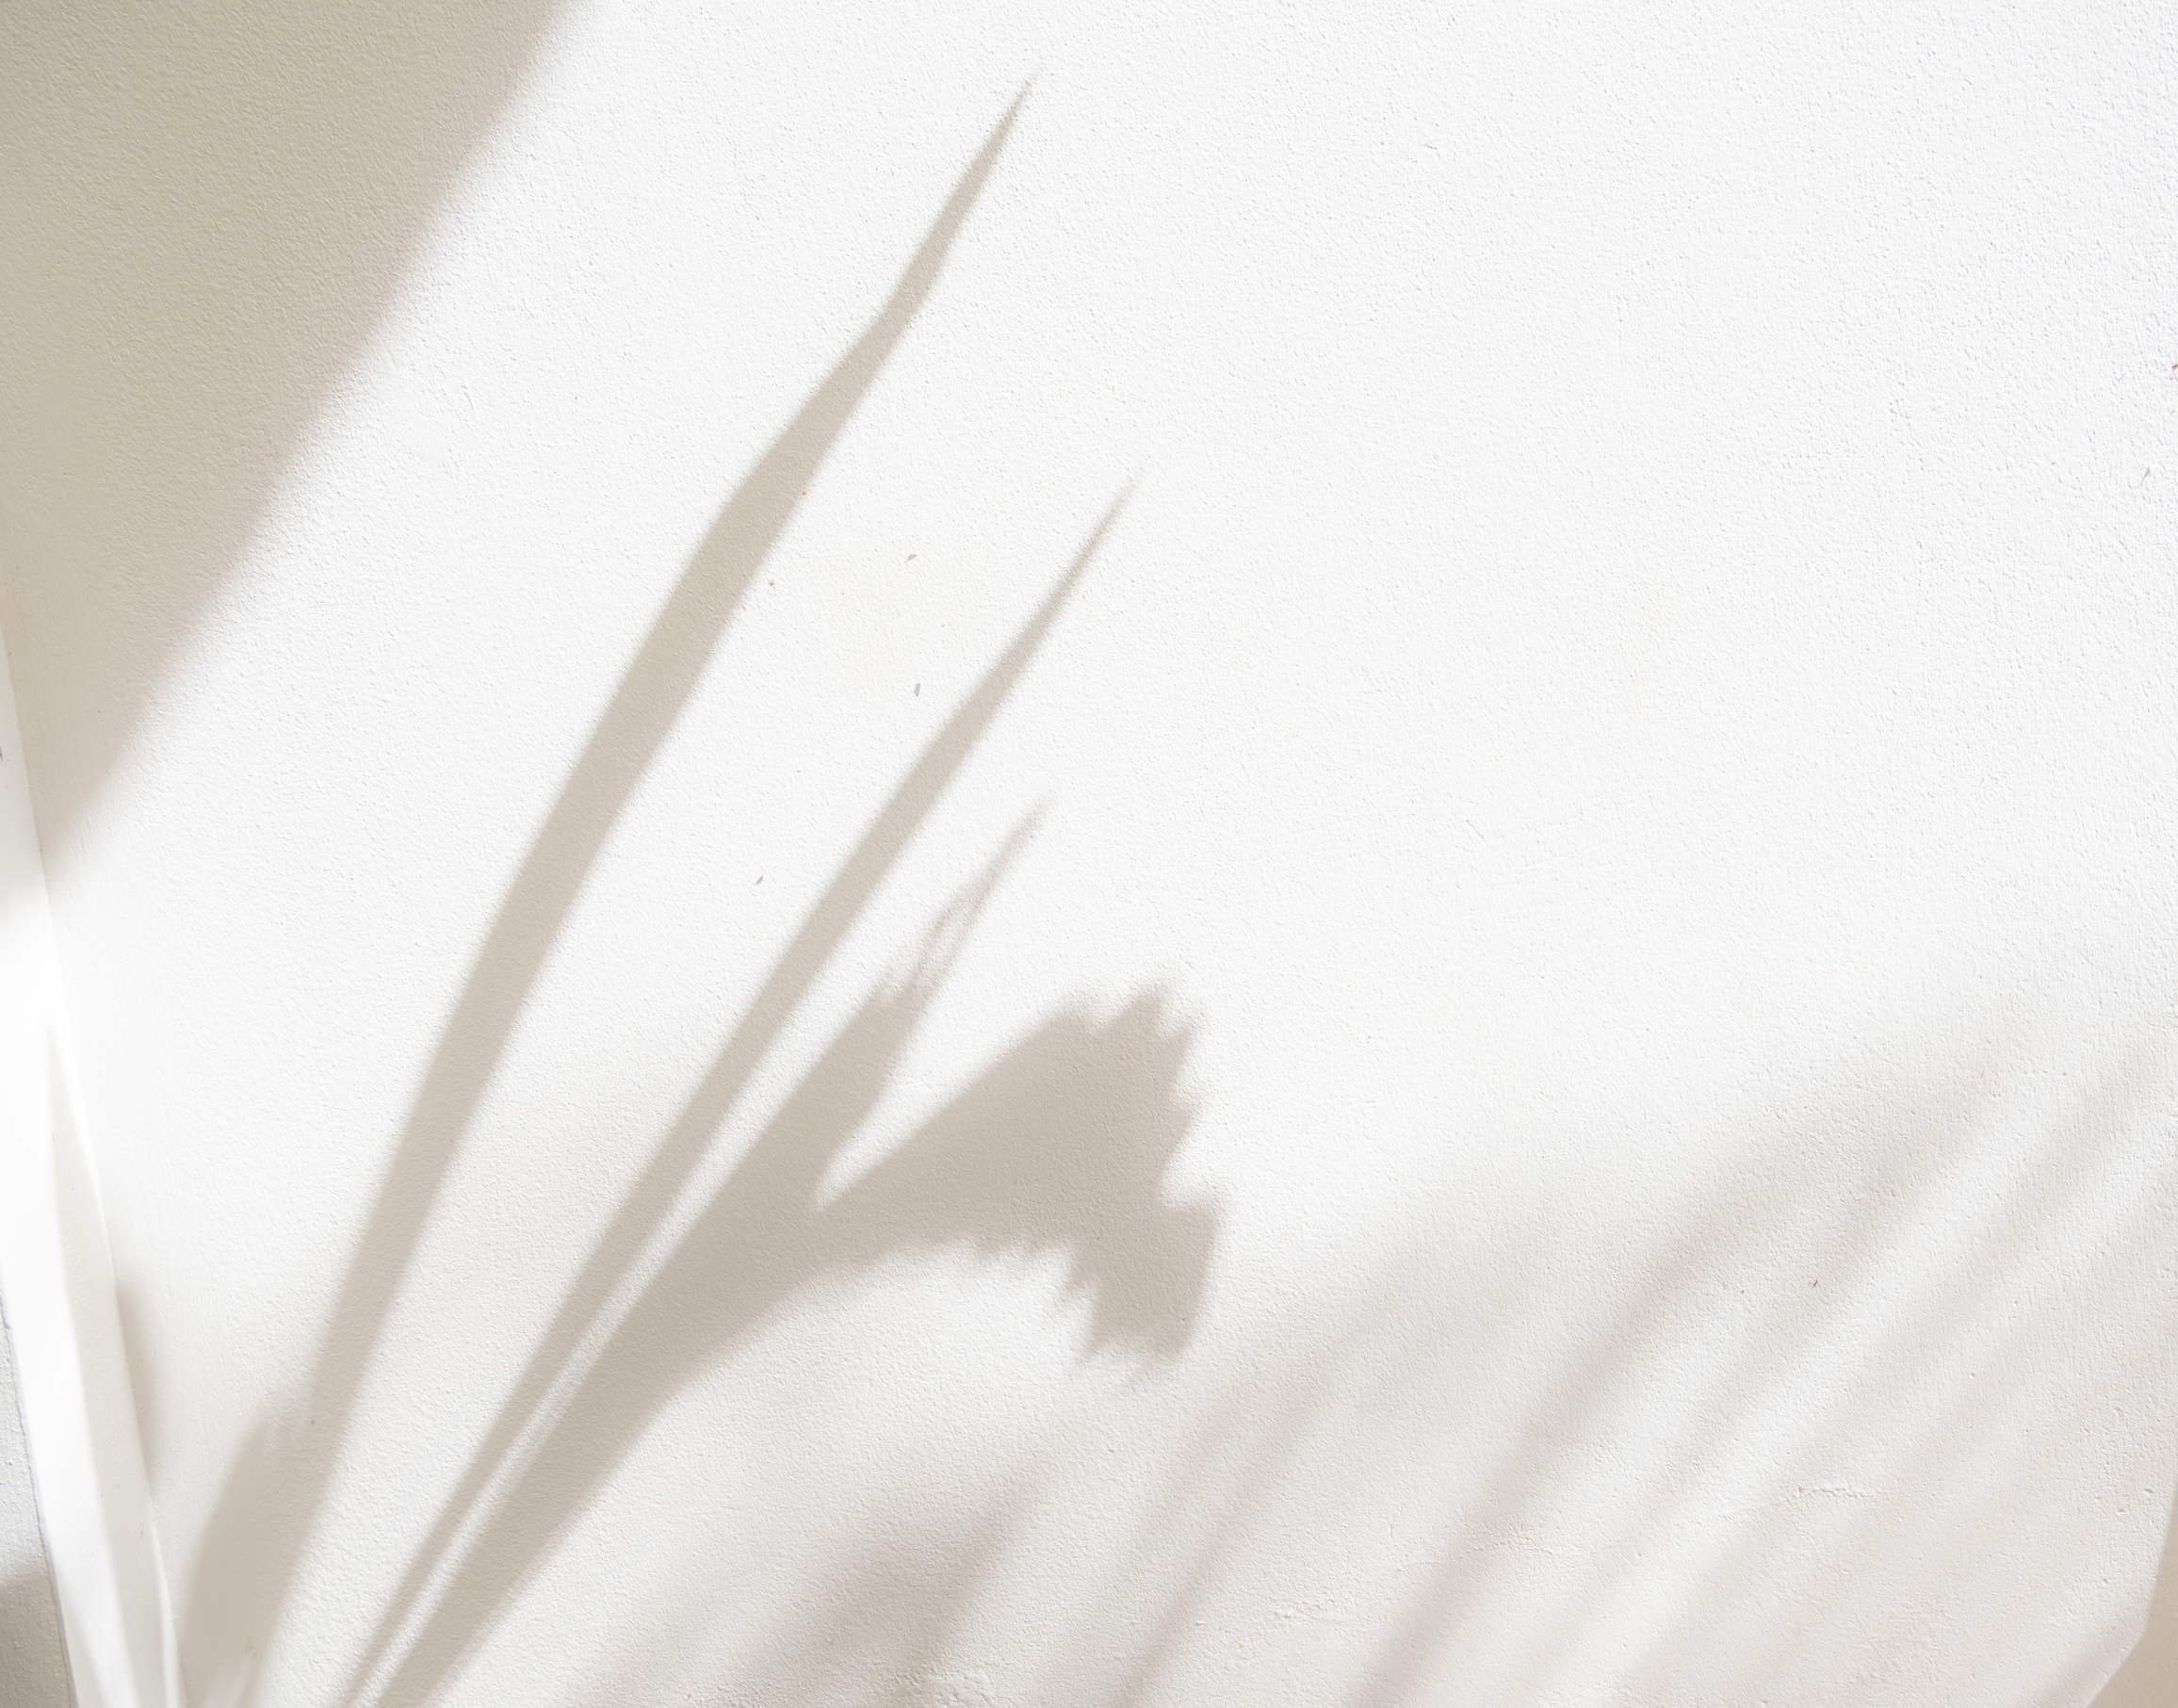 Shadows of Leaves on White Background